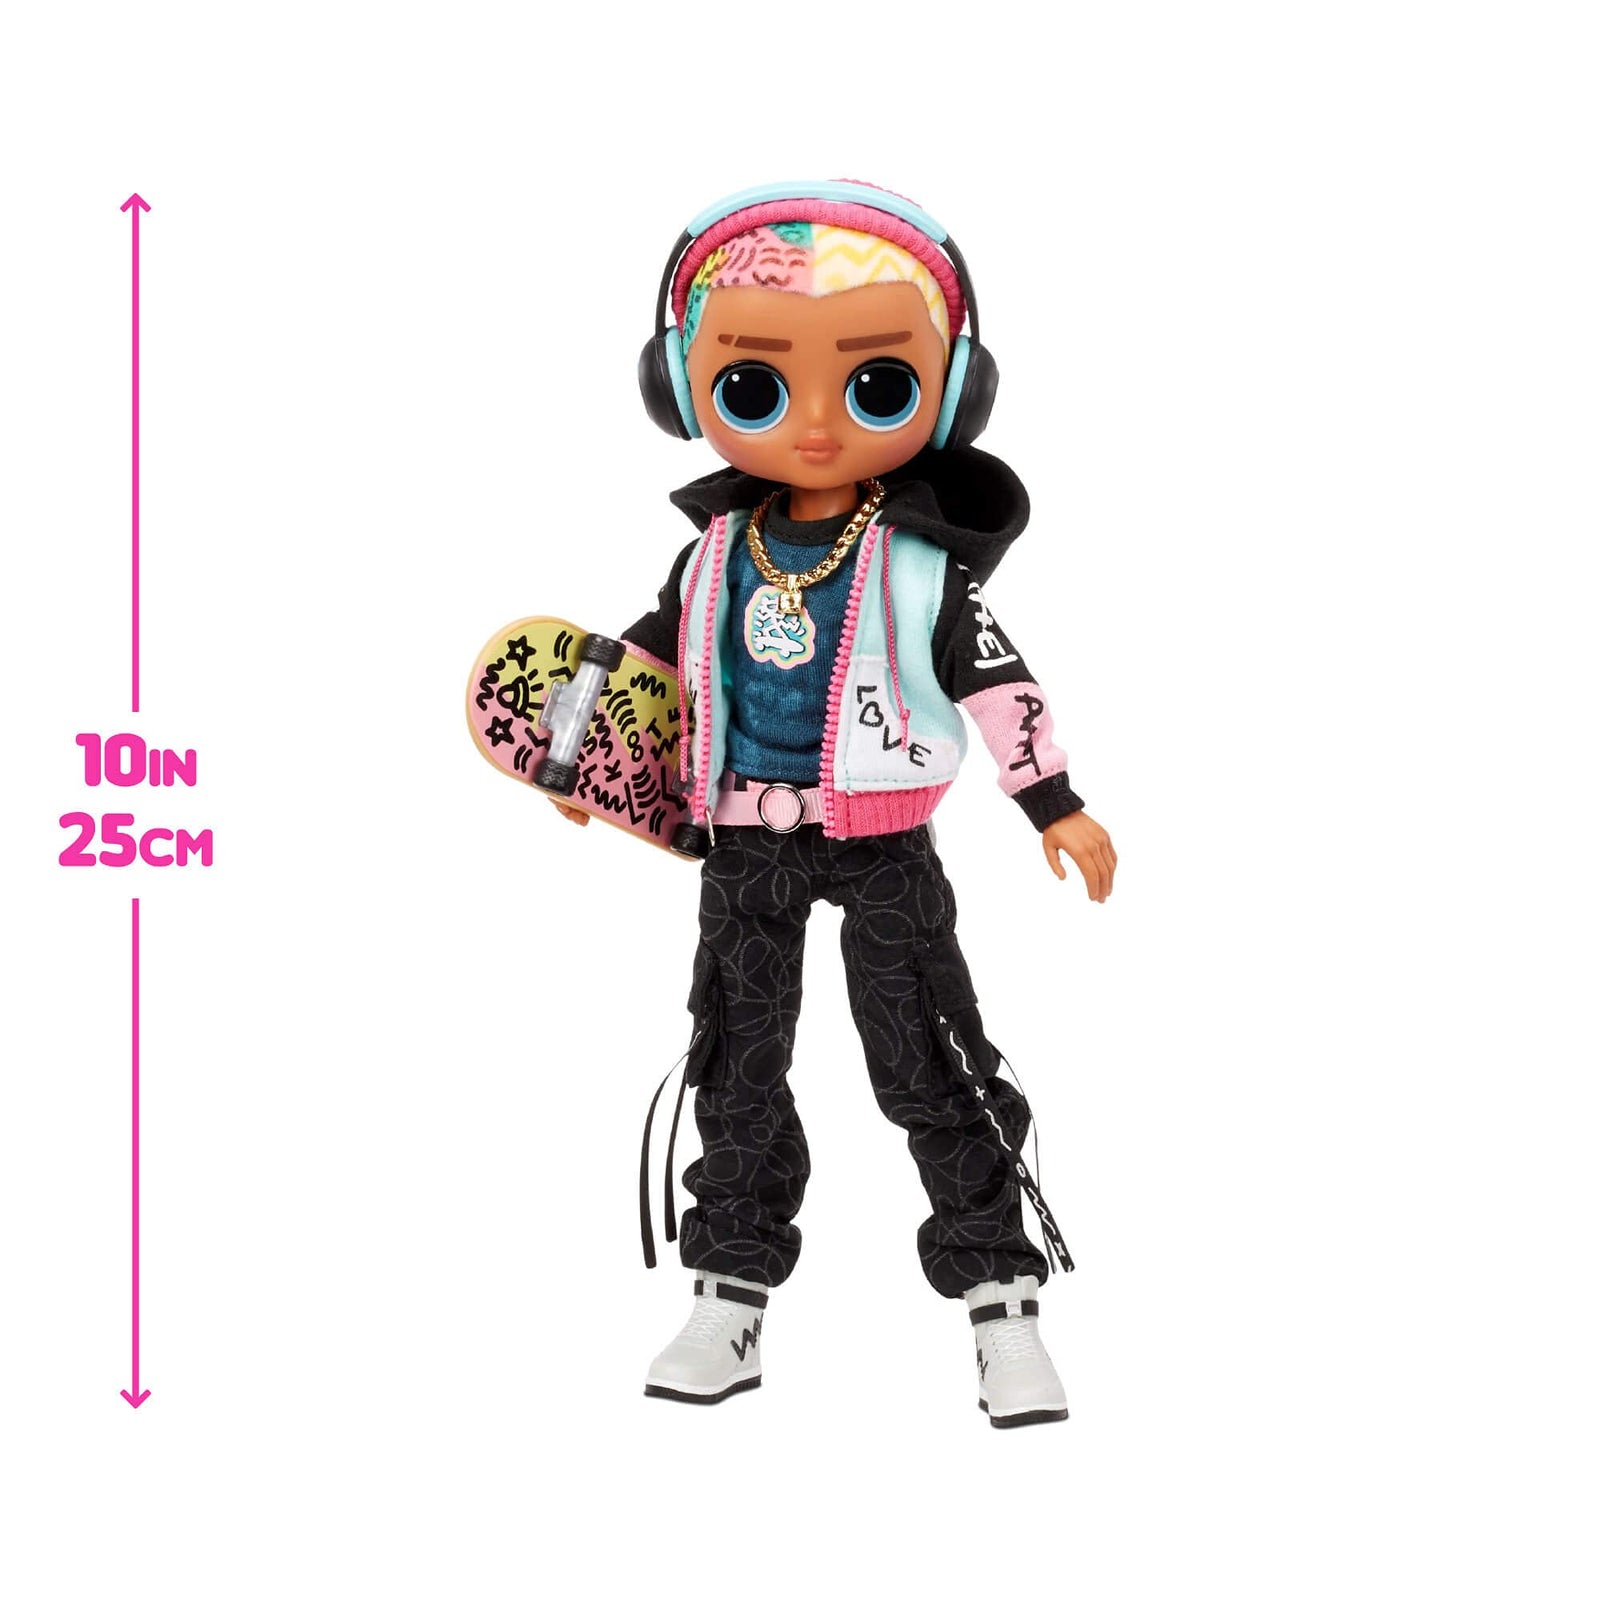 LOL Surprise OMG Guys Fashion Doll Cool Lev with 20 Surprises, Poseable, Including Skateboard, Outfit & Accessories Playset - Gift for Kids & Collectors, Toys for Girls Boys Ages 4 5 6 7+ Years Old